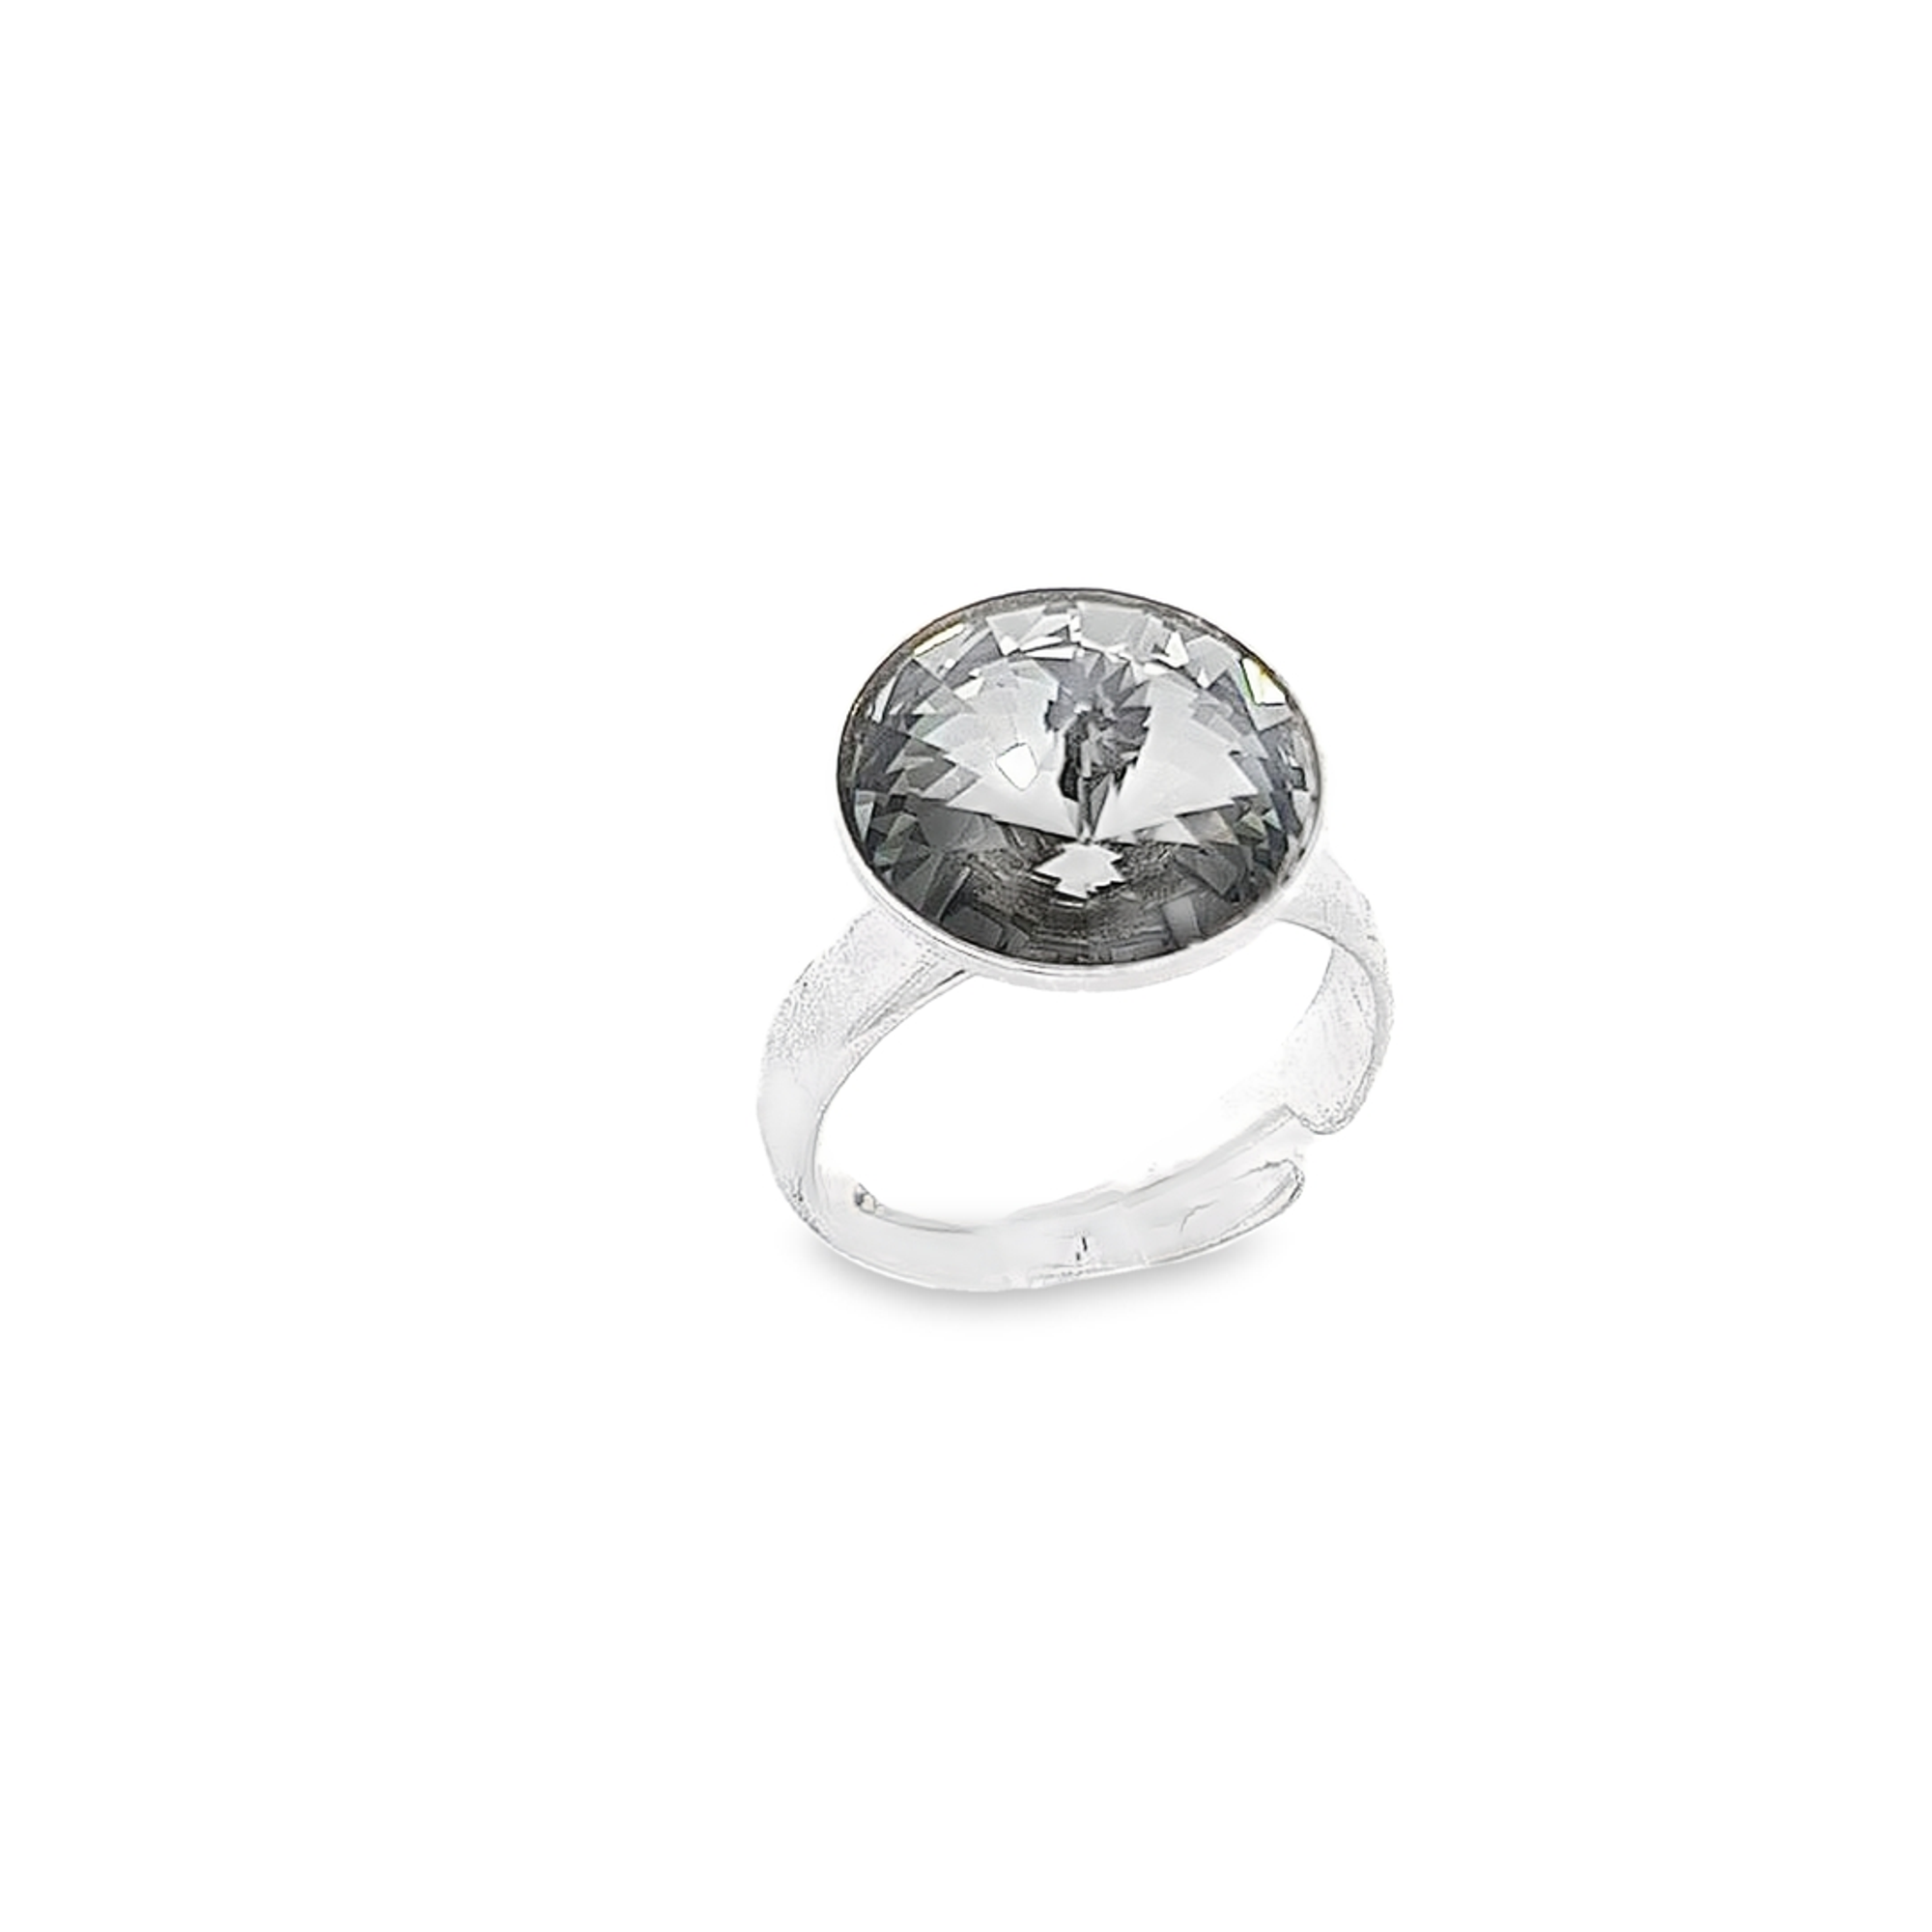 12mm Round Rivoli Solitaire Ring in Sterling Silver - Available in Silver Night, Tanzanite Purple, or Light Siam Red